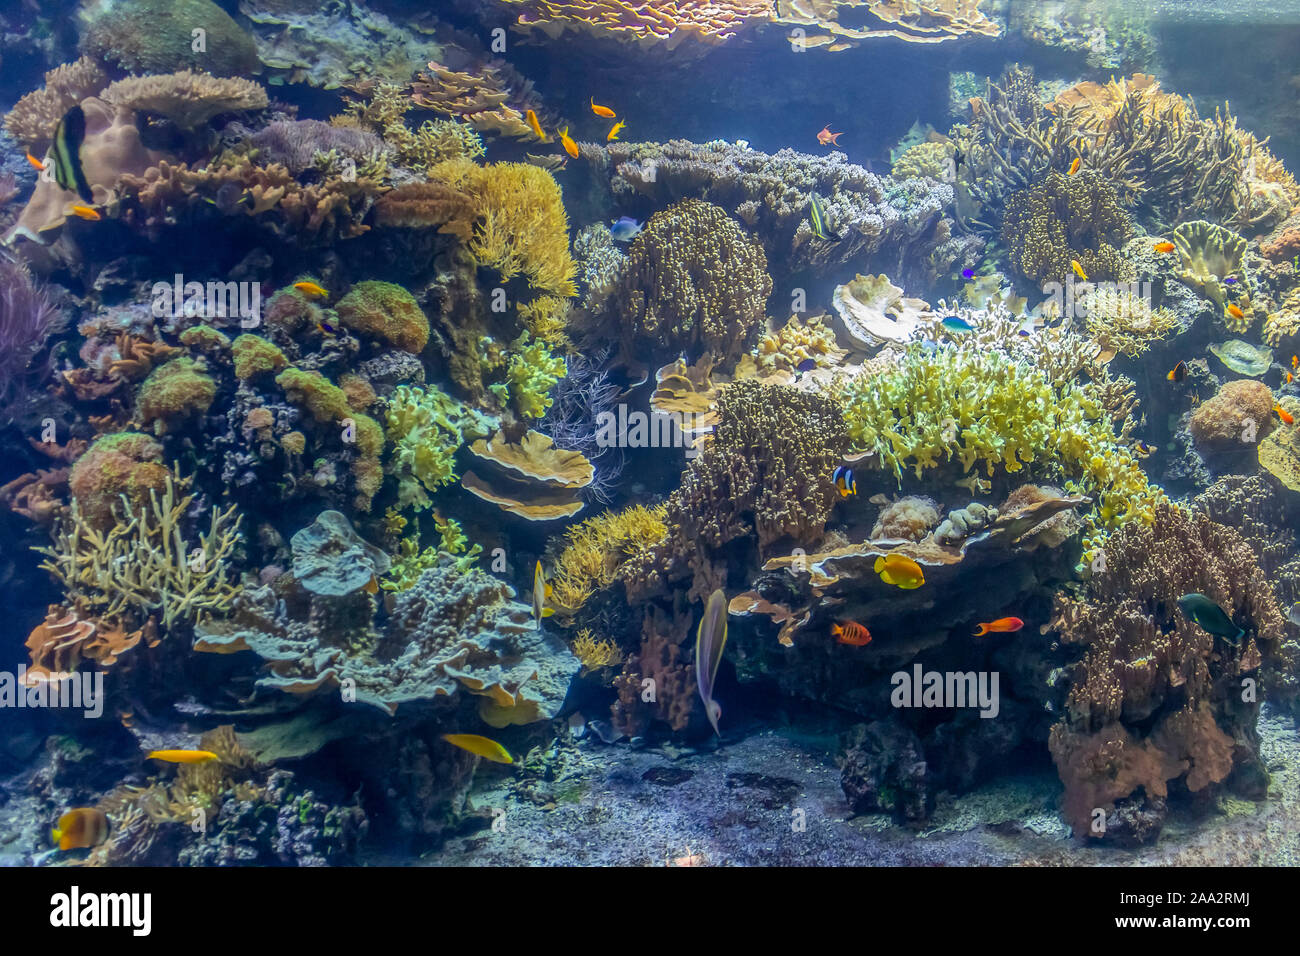 submerged coral reef scenery including lots of colorful fishes Stock Photo